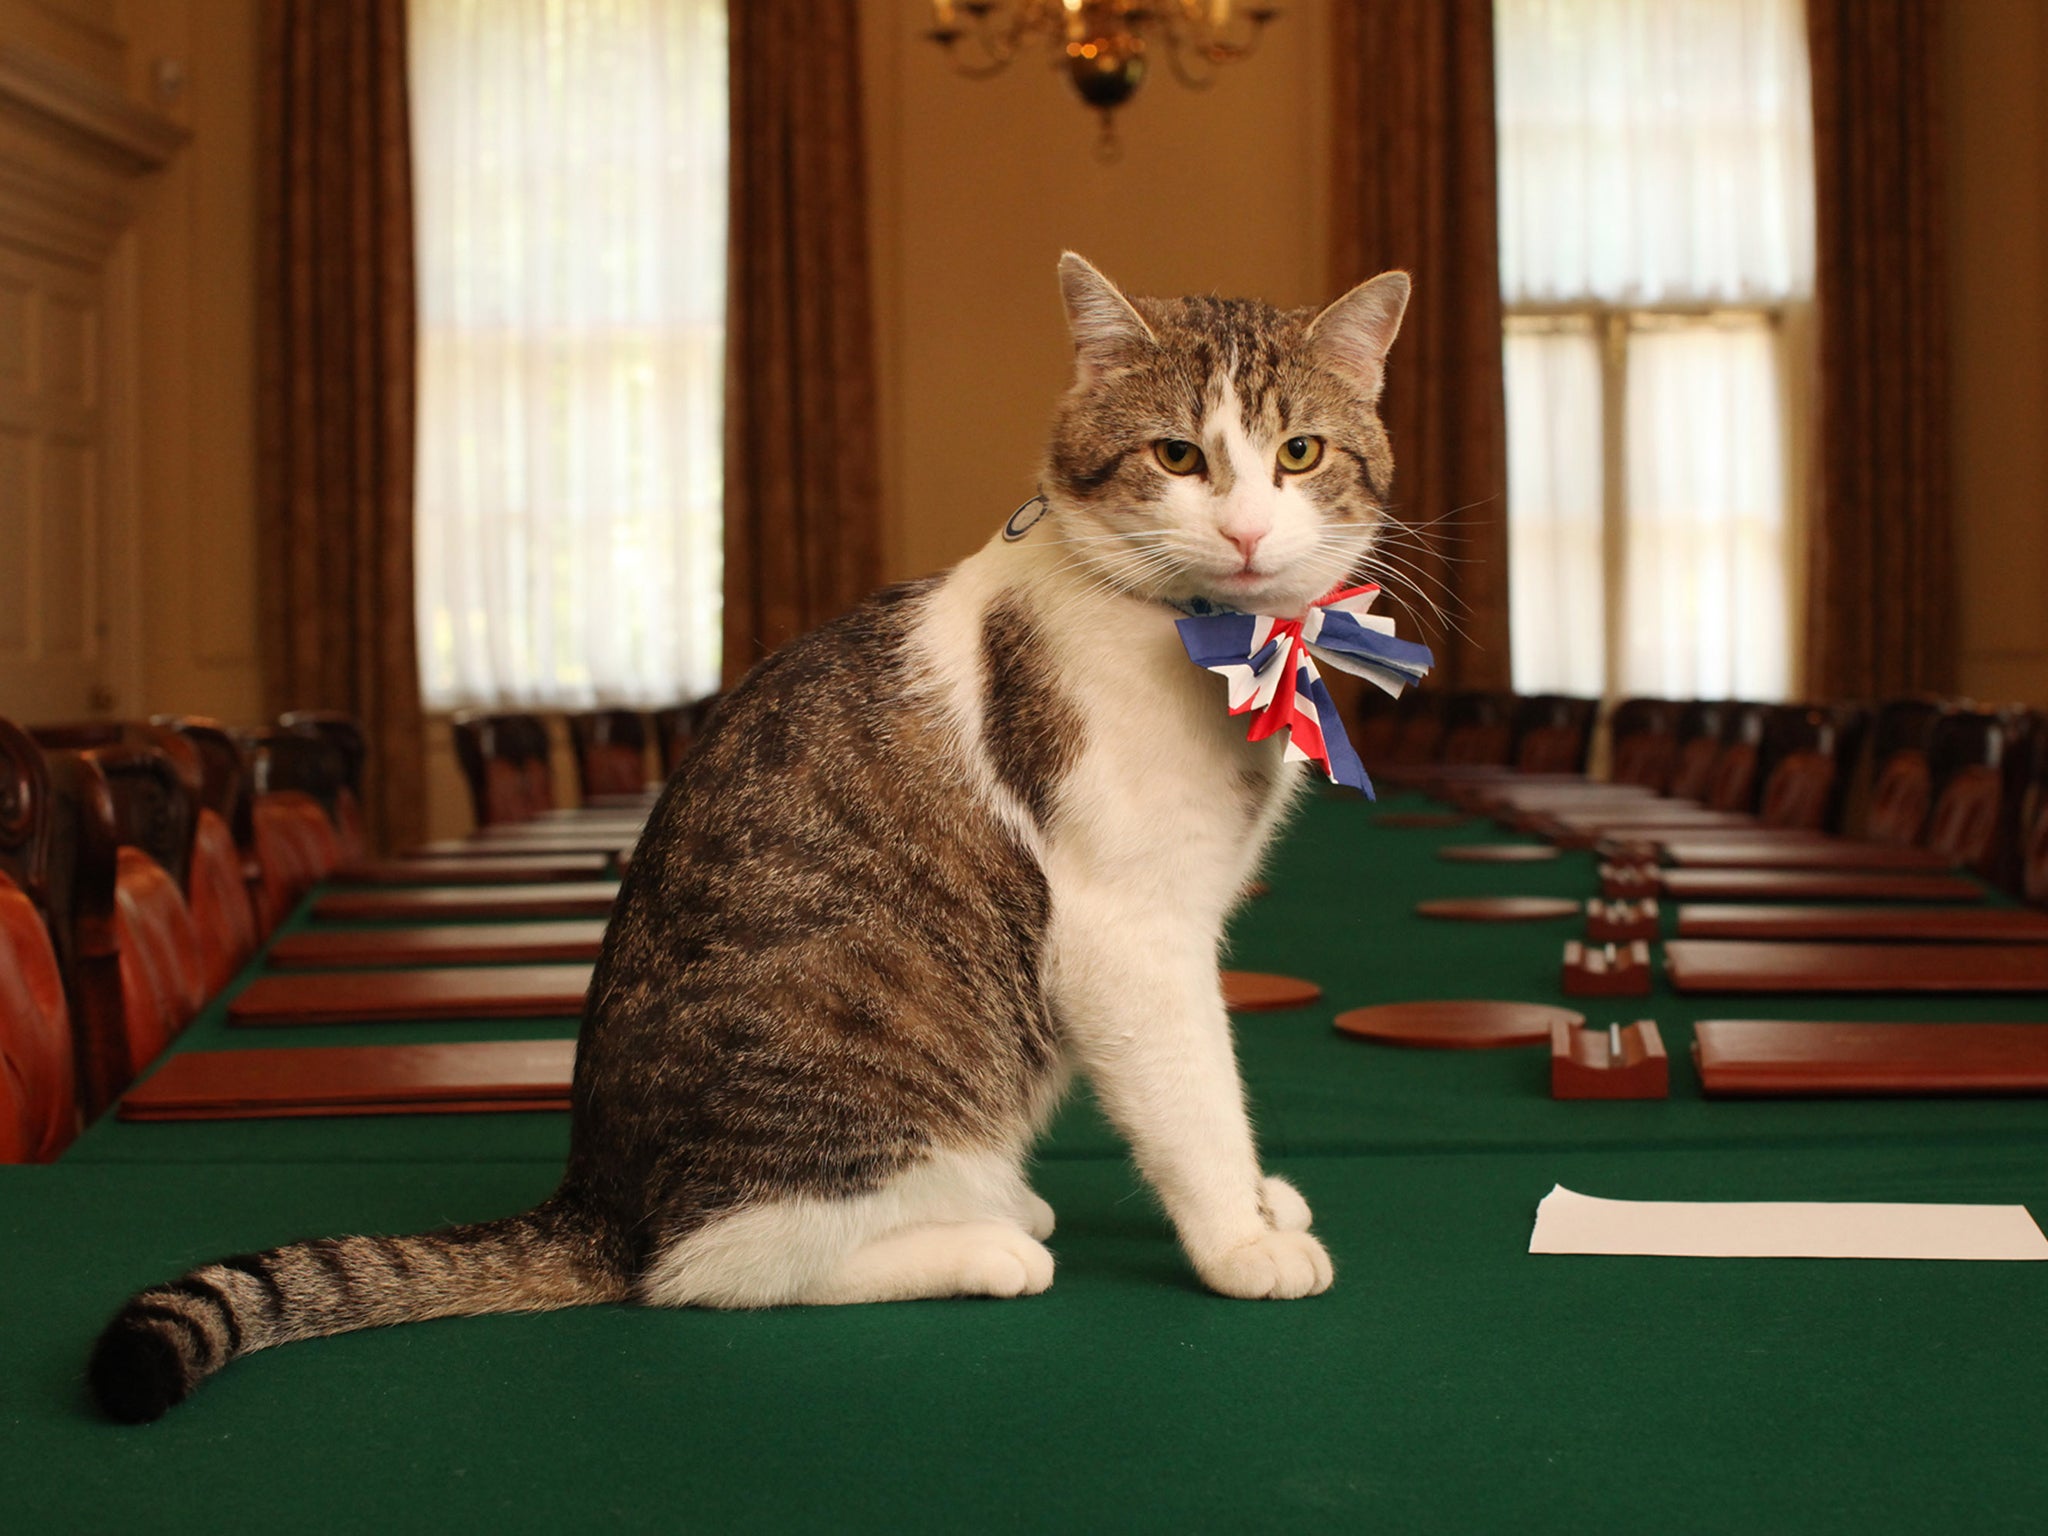 Larry, the Downing Street cat.